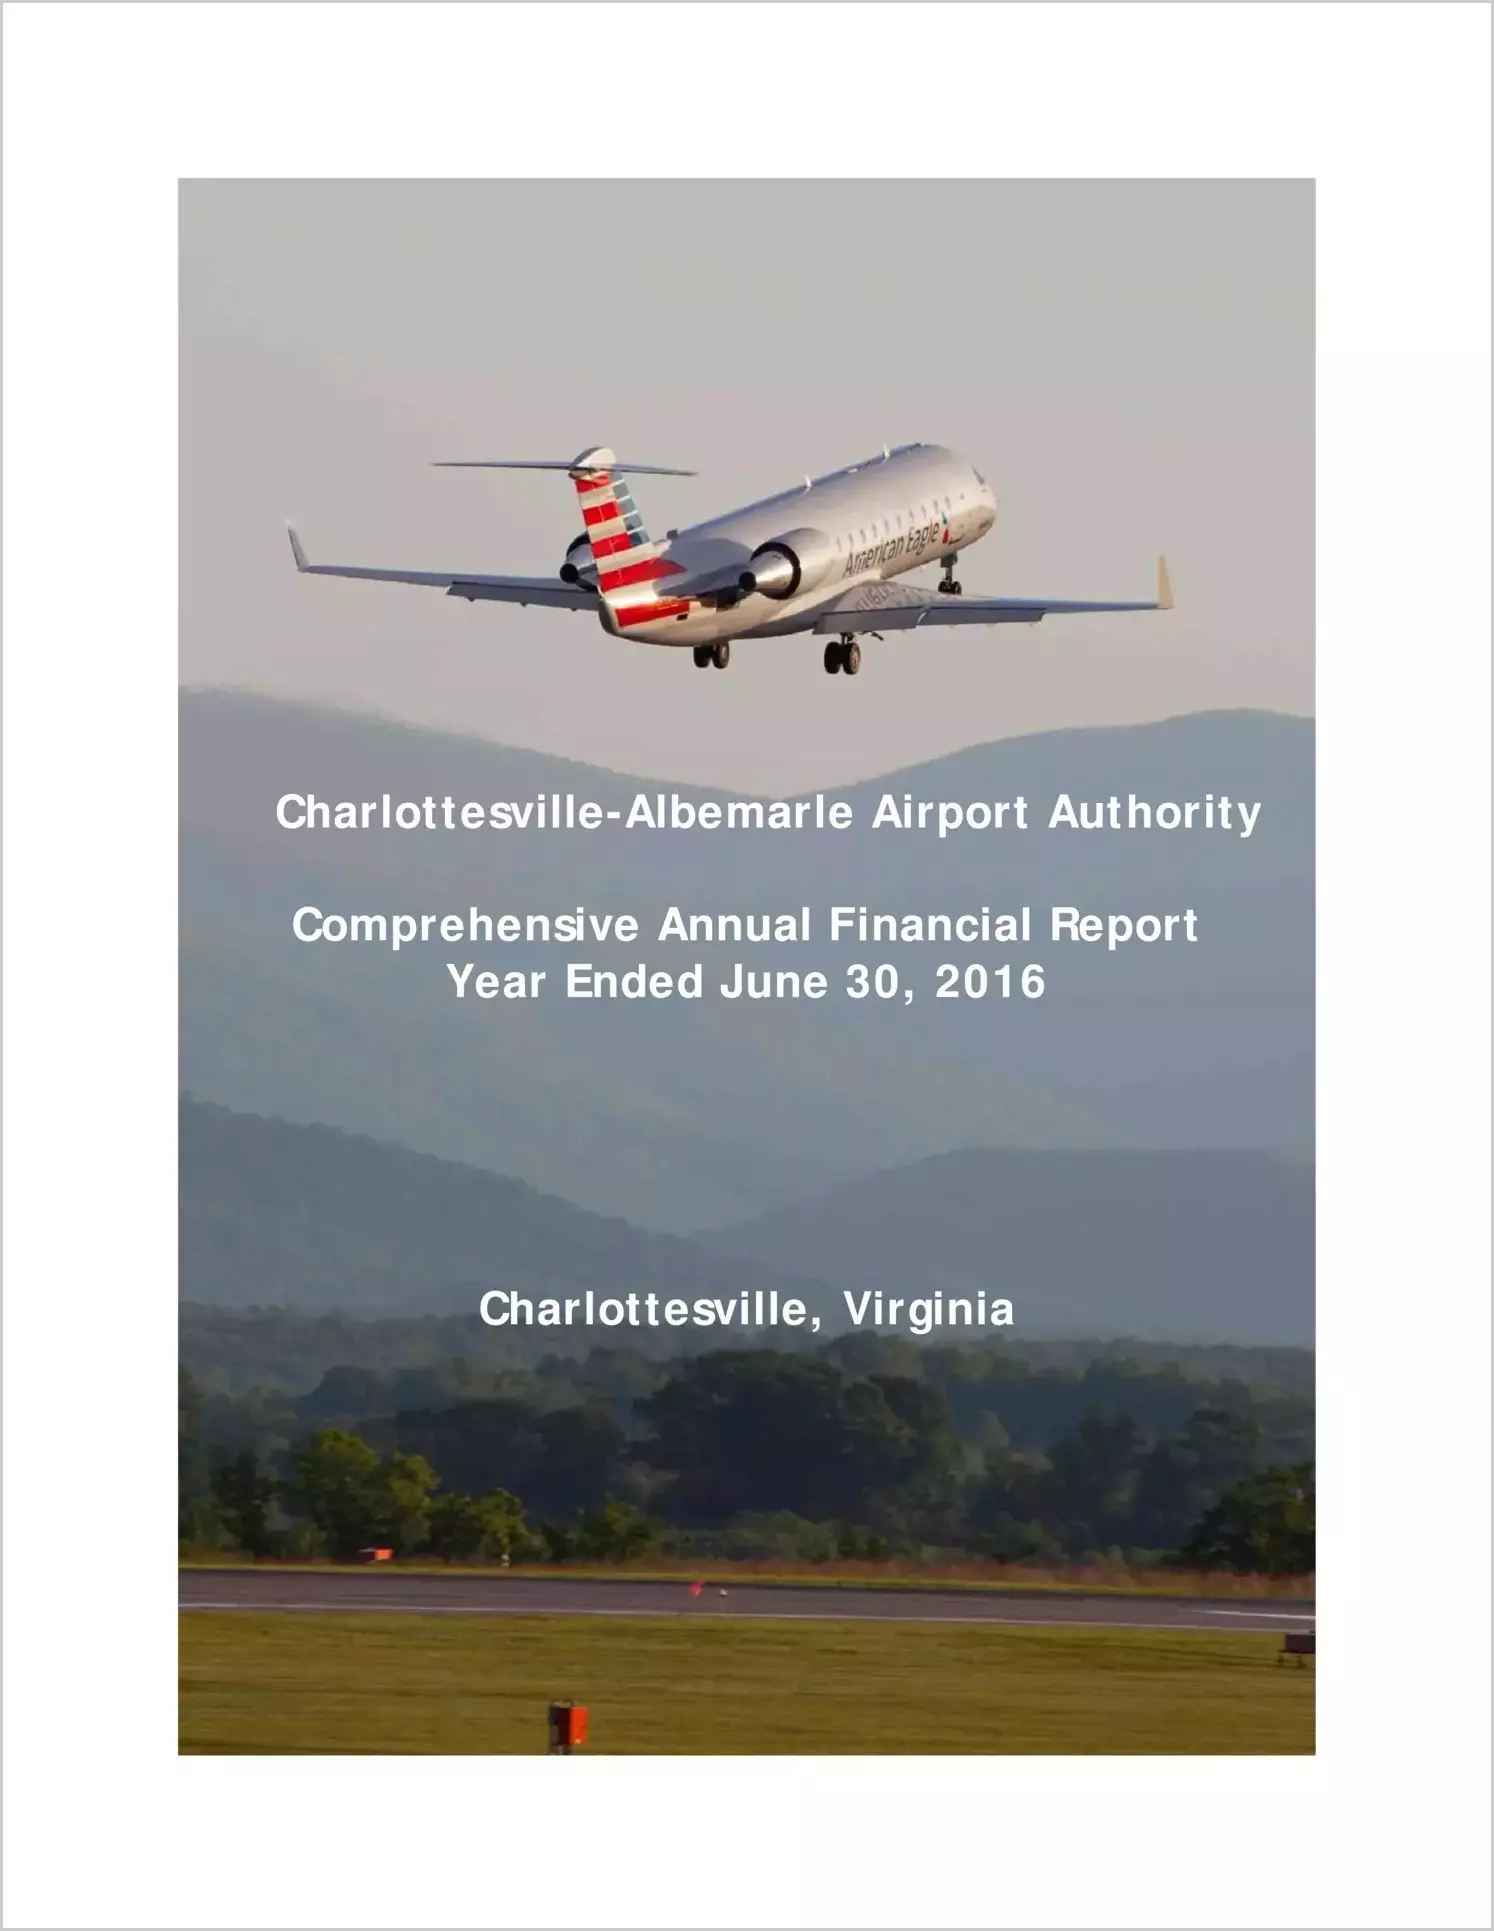 2016 ABC/Other Annual Financial Report  for Charlottesville-Albemarle Airport Authority